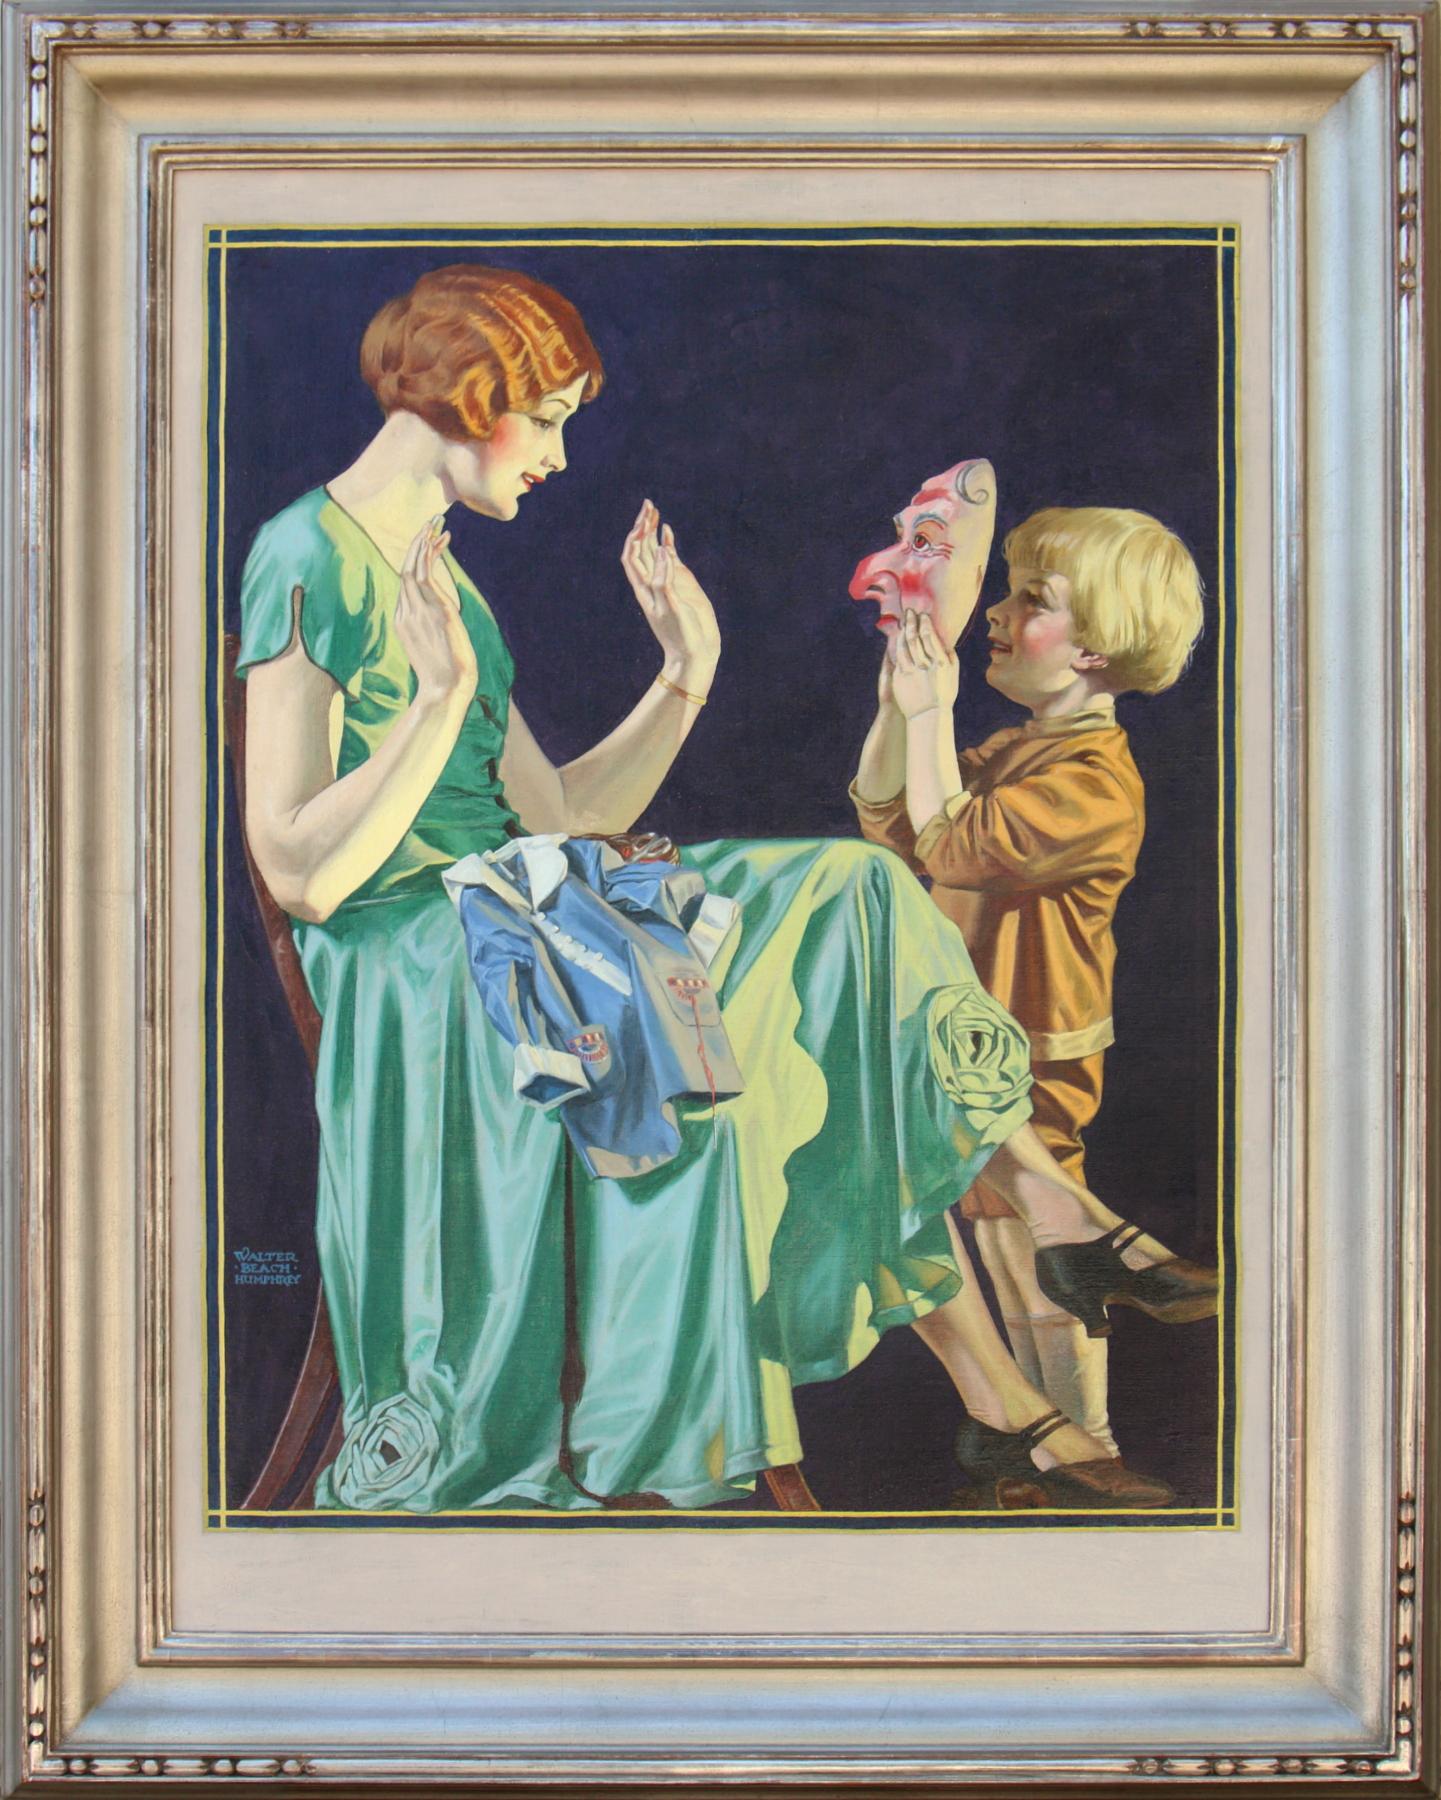 Scaring Mother - Other Art Style Painting by Walter Beach Humphrey